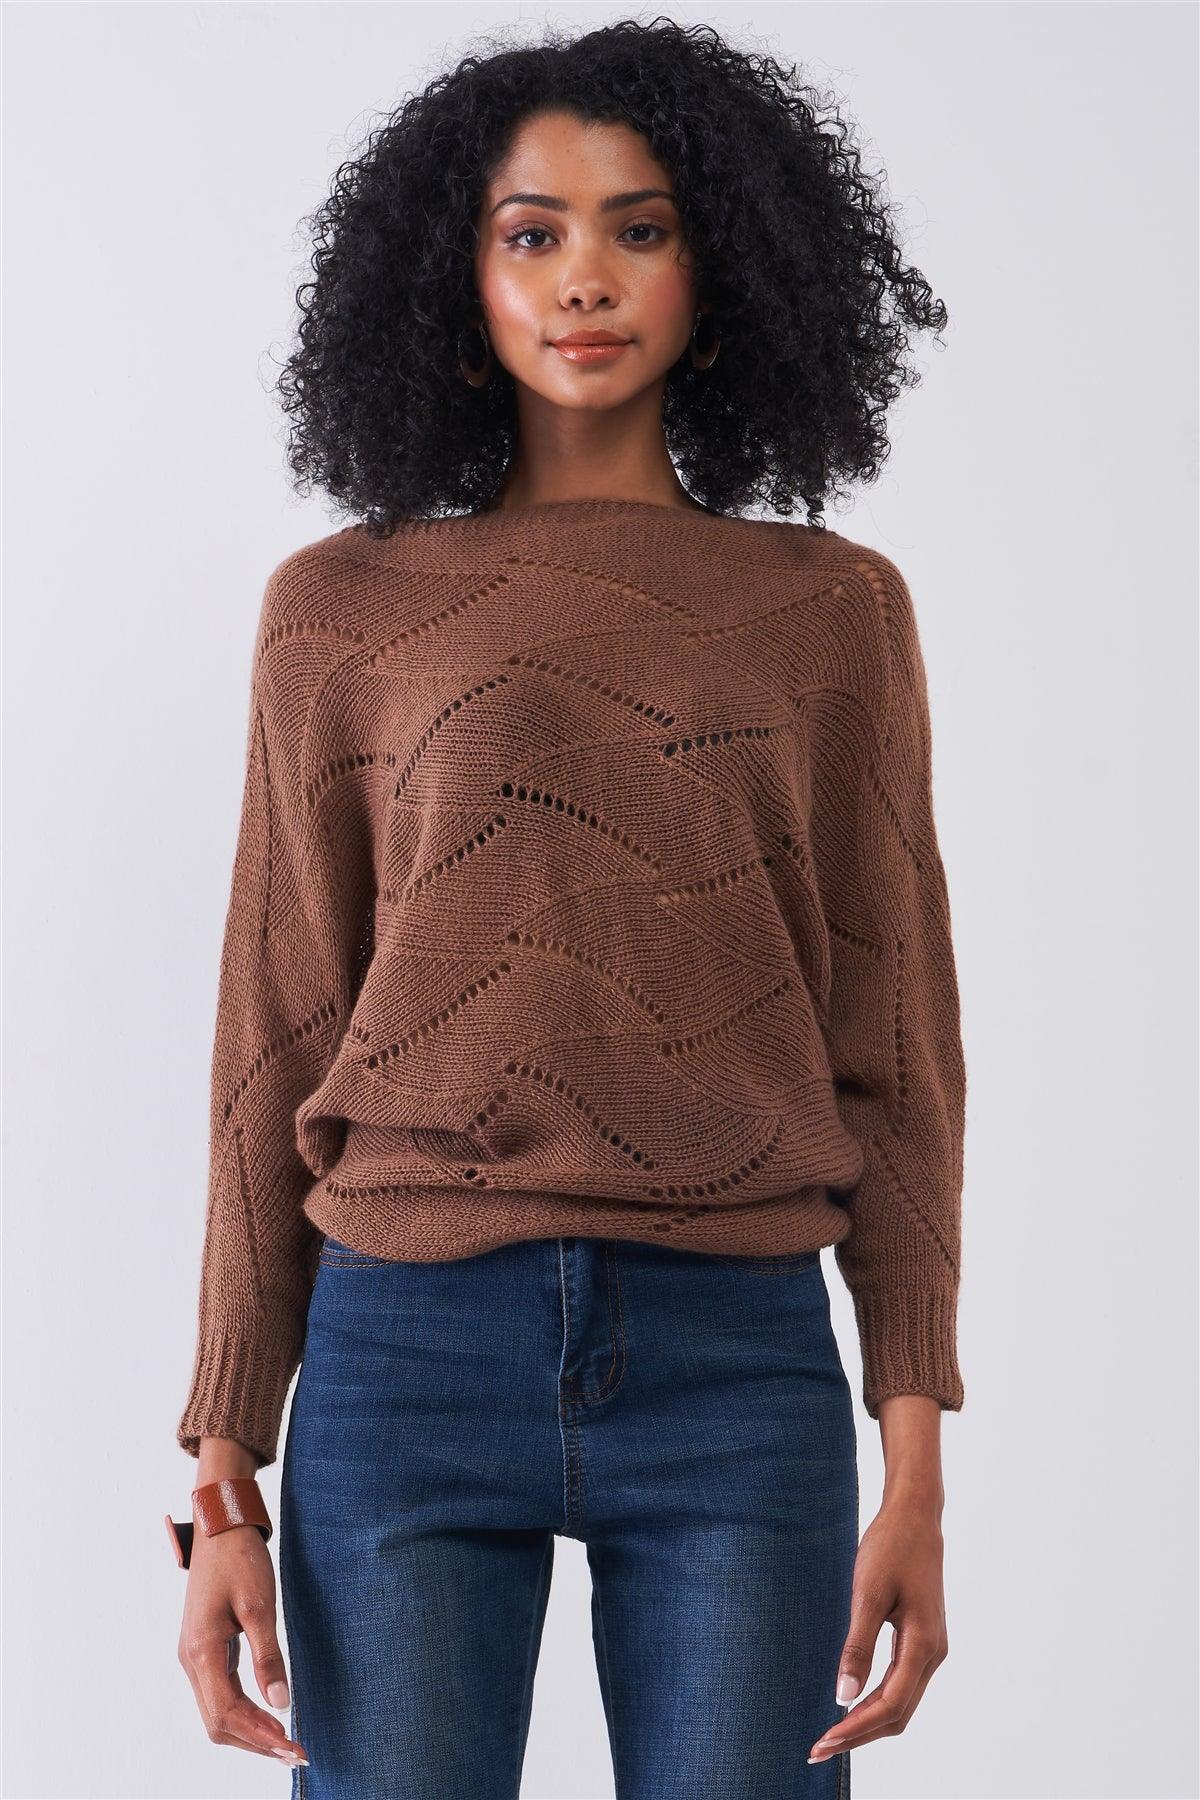 Mocha Brown Cable Knit Mock Neck Long Sleeve Relaxed Sweater /2-1-2-1